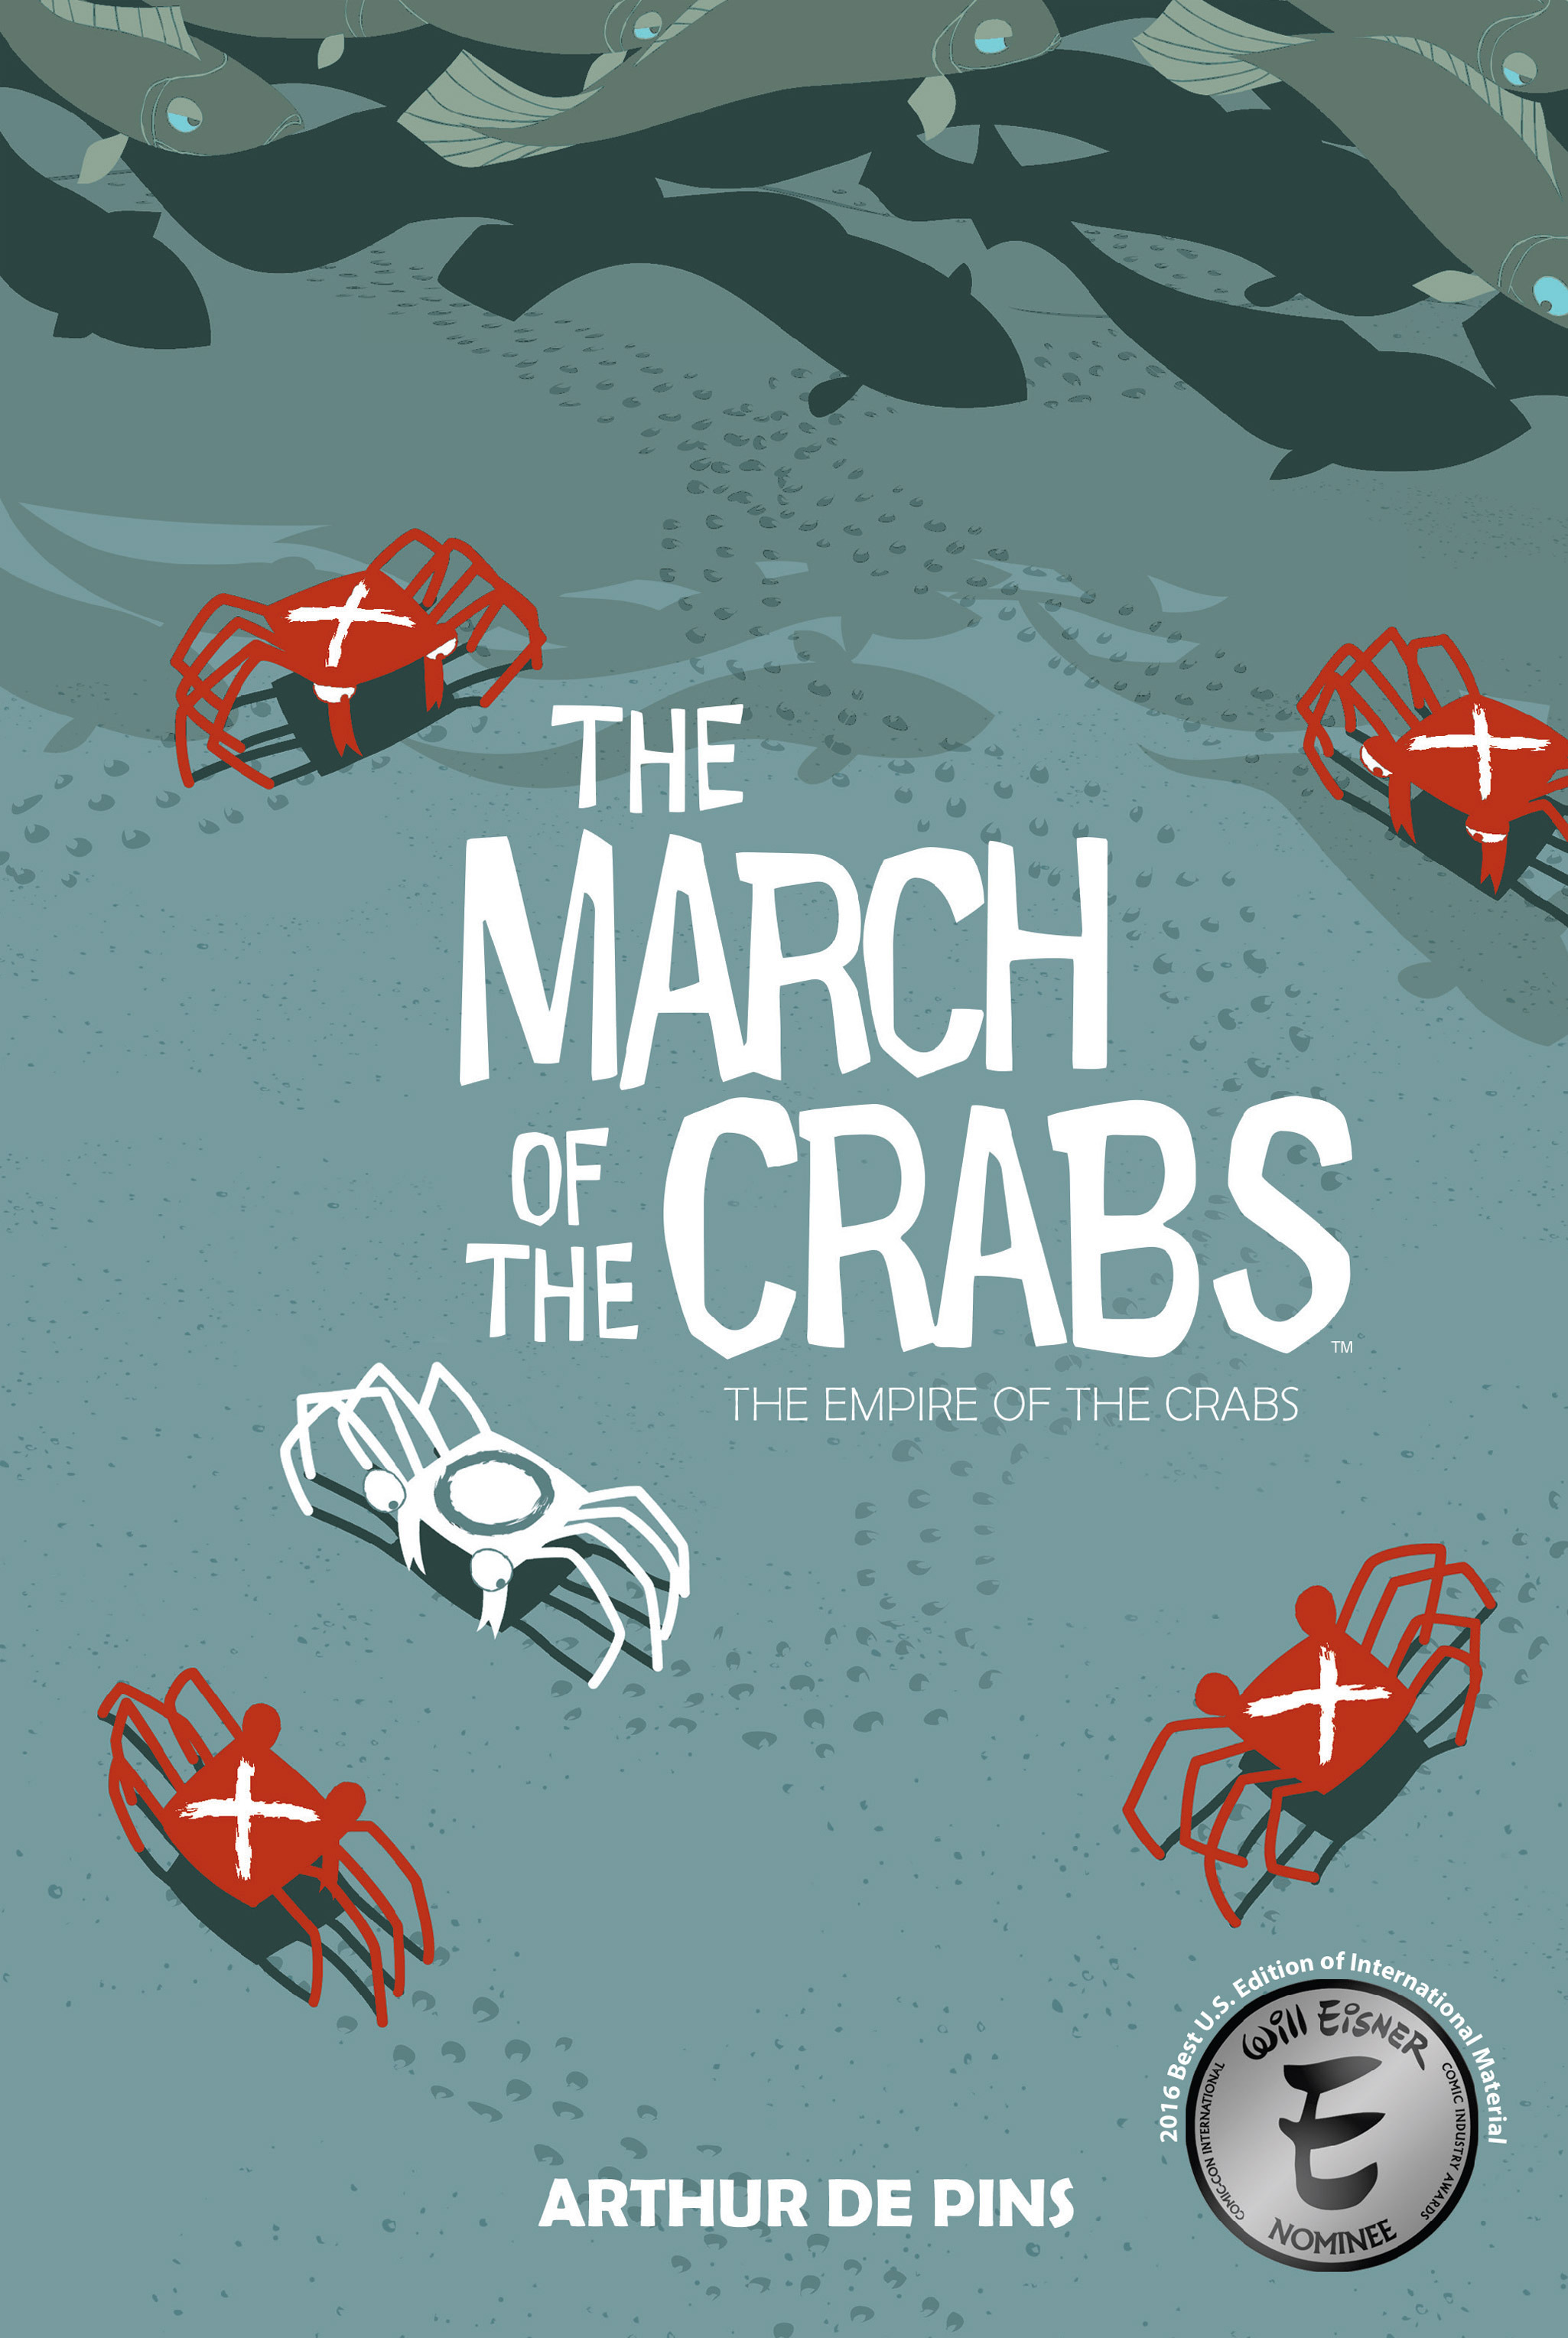 Read online The March of the Crabs comic -  Issue # TPB 2 - 1